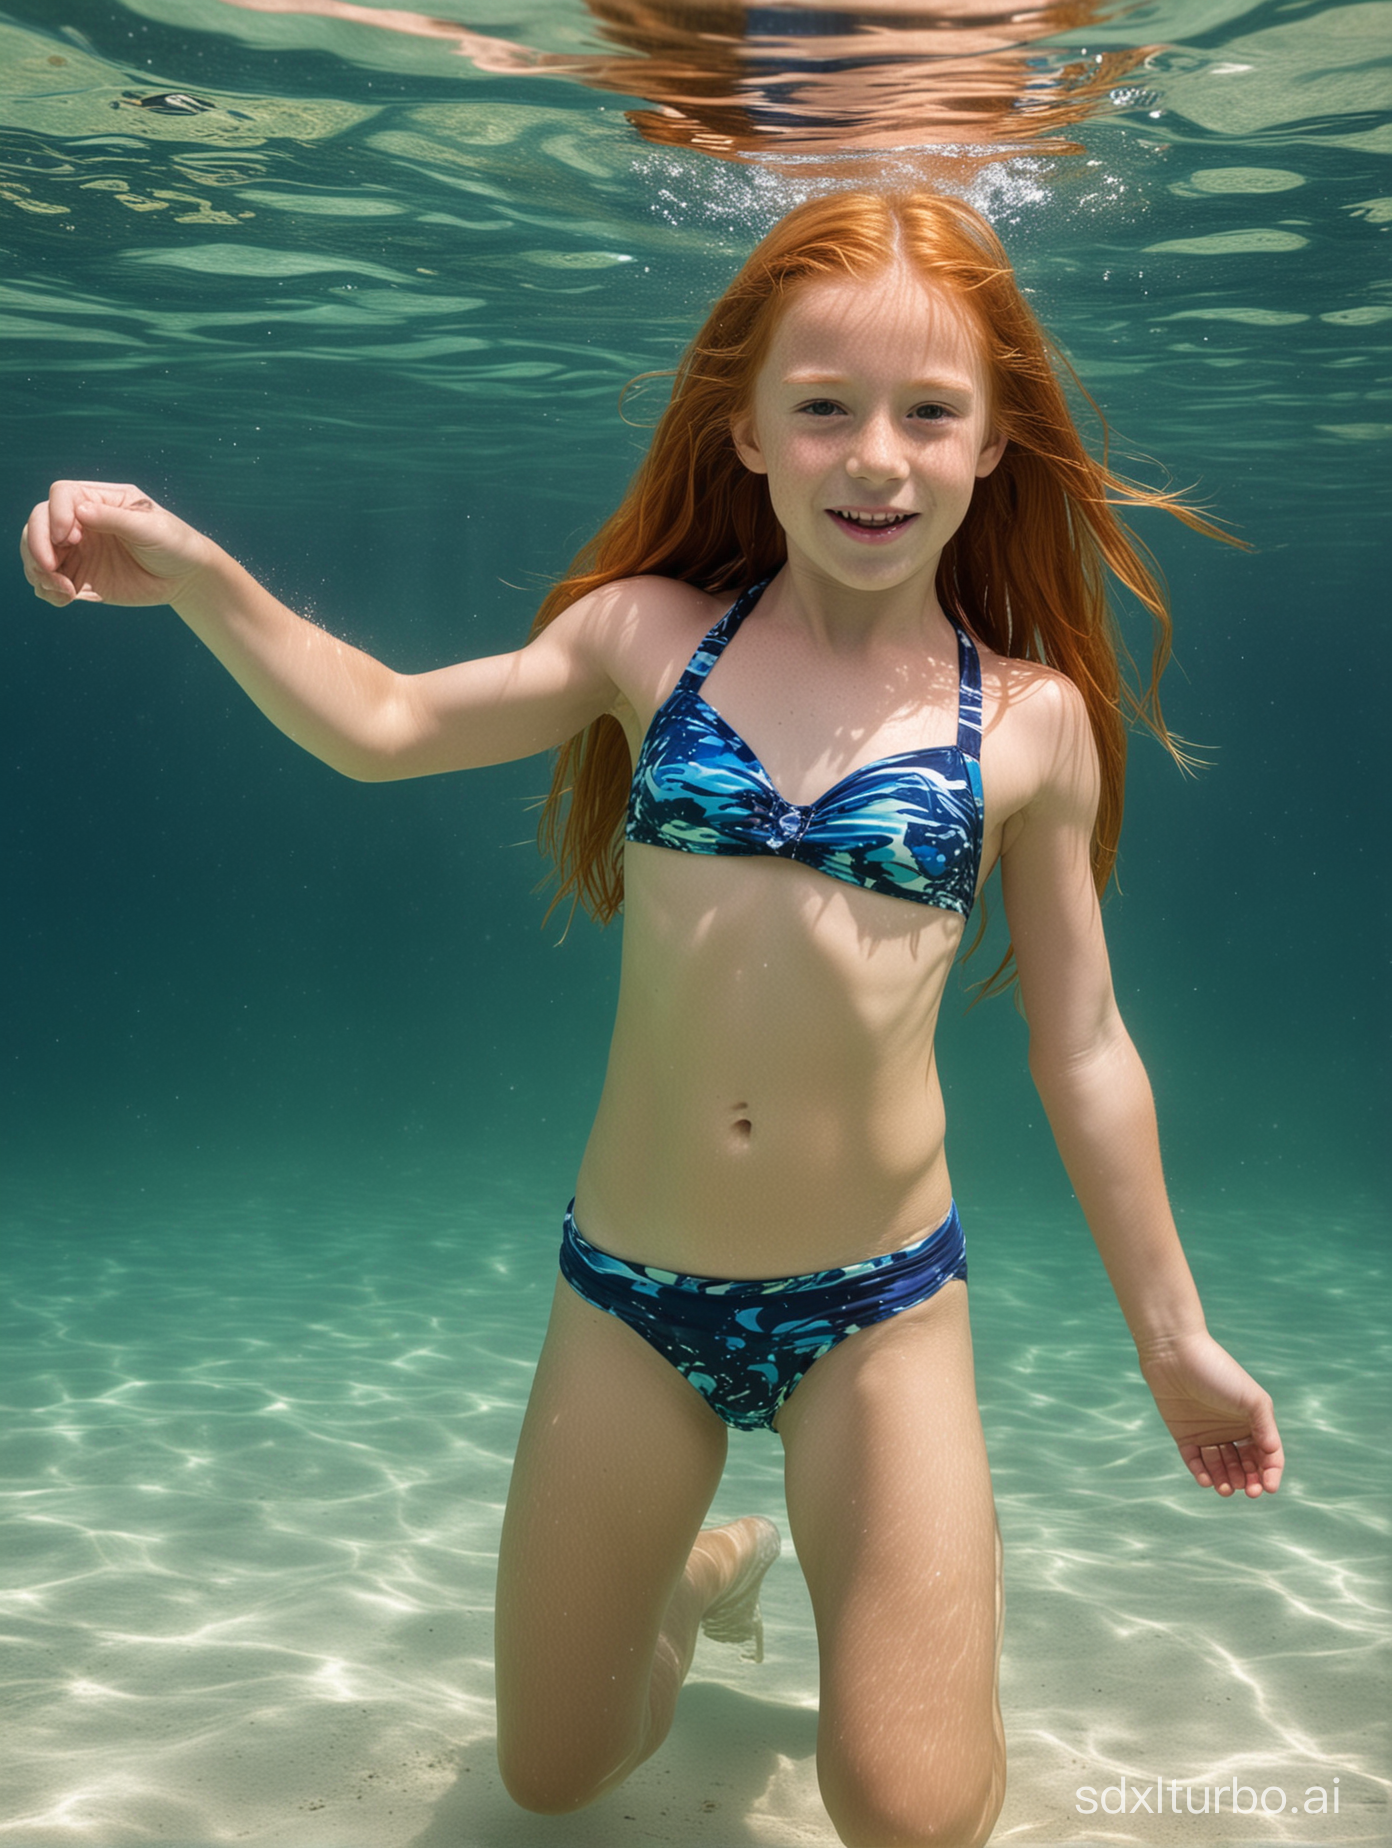 6 years old, long ginger hair, flat chested, very muscular abs, showing her belly, underwater8 years old, long ginger hair